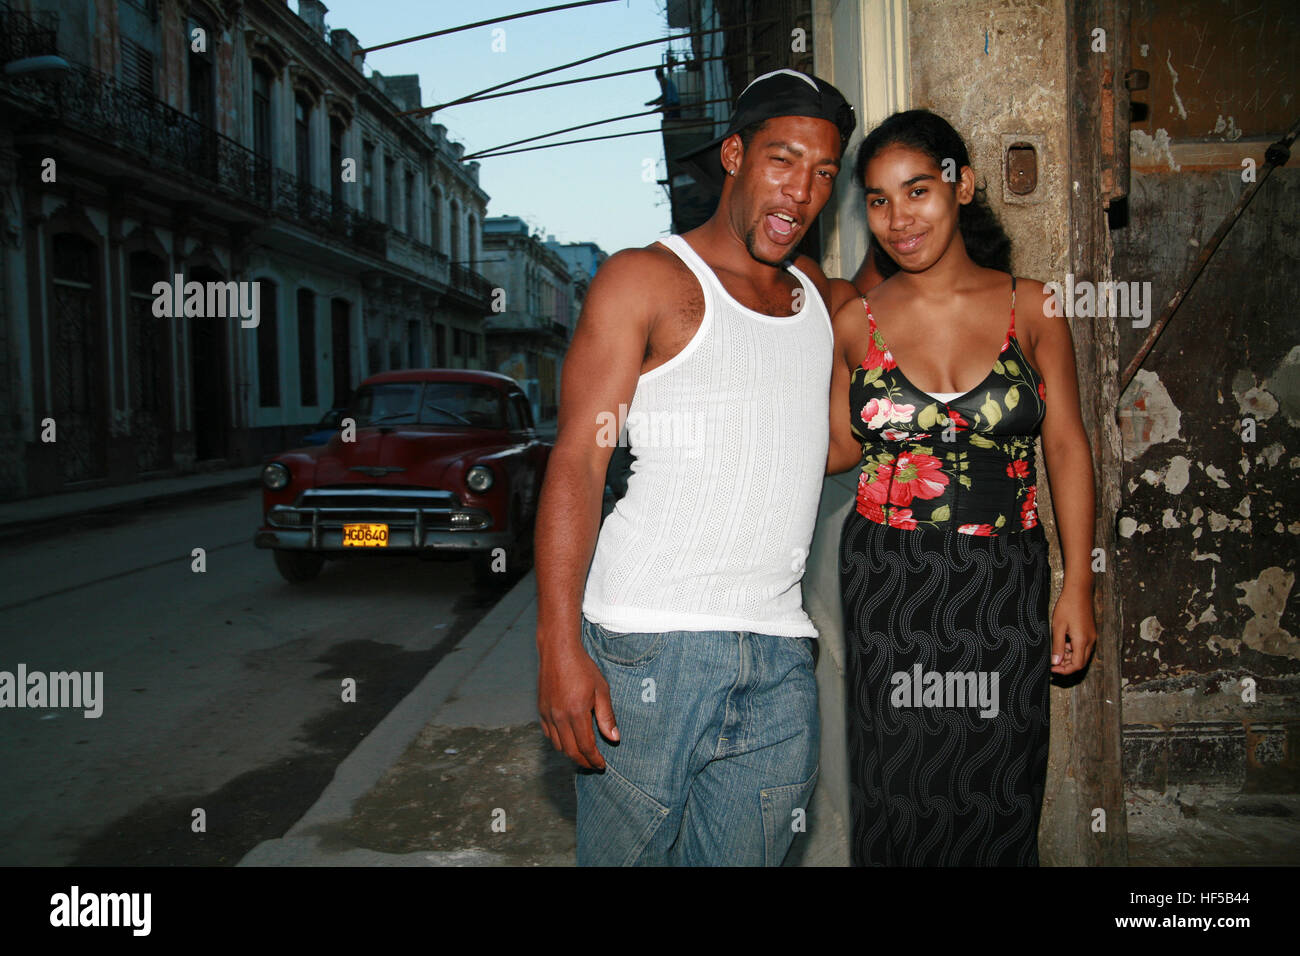 Young couple and vintage car in the background, Havana, Cuba, Caribbean, Americas Stock Photo